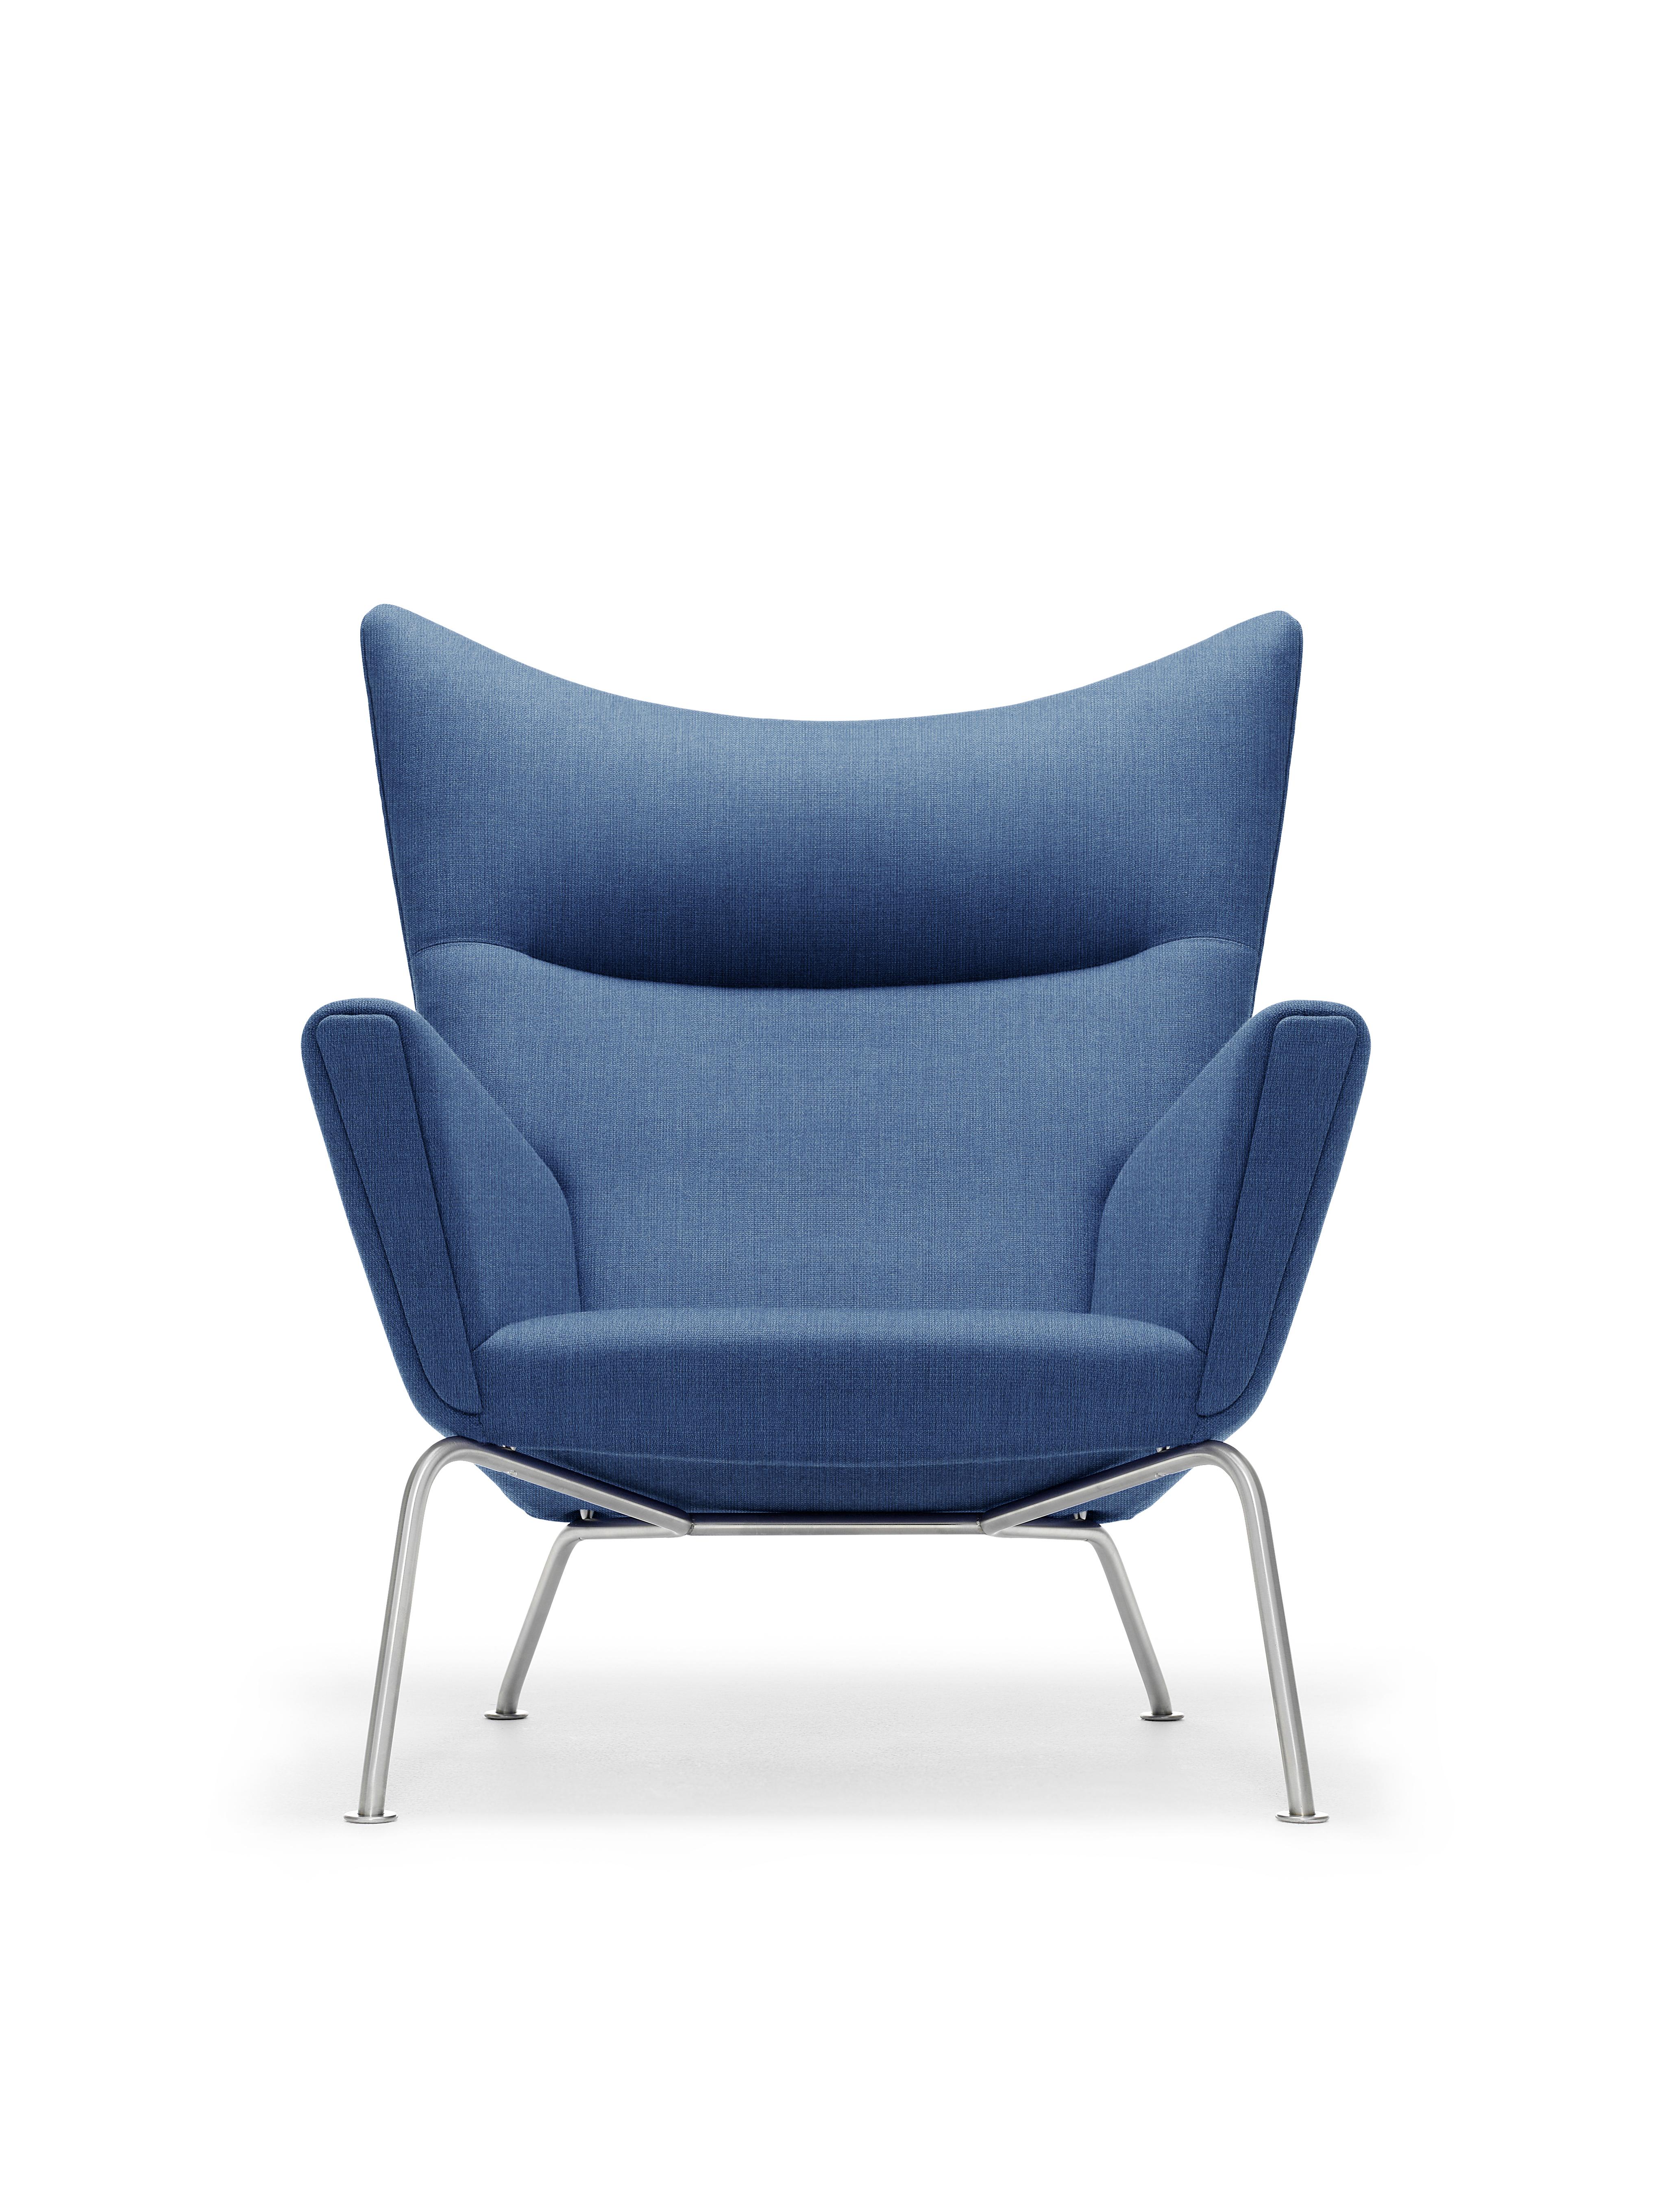 Blue (Kvadrat Canvas 746) CH445 Wing Chair in Fabric with Stainless Steel Base by Hans J. Wegner